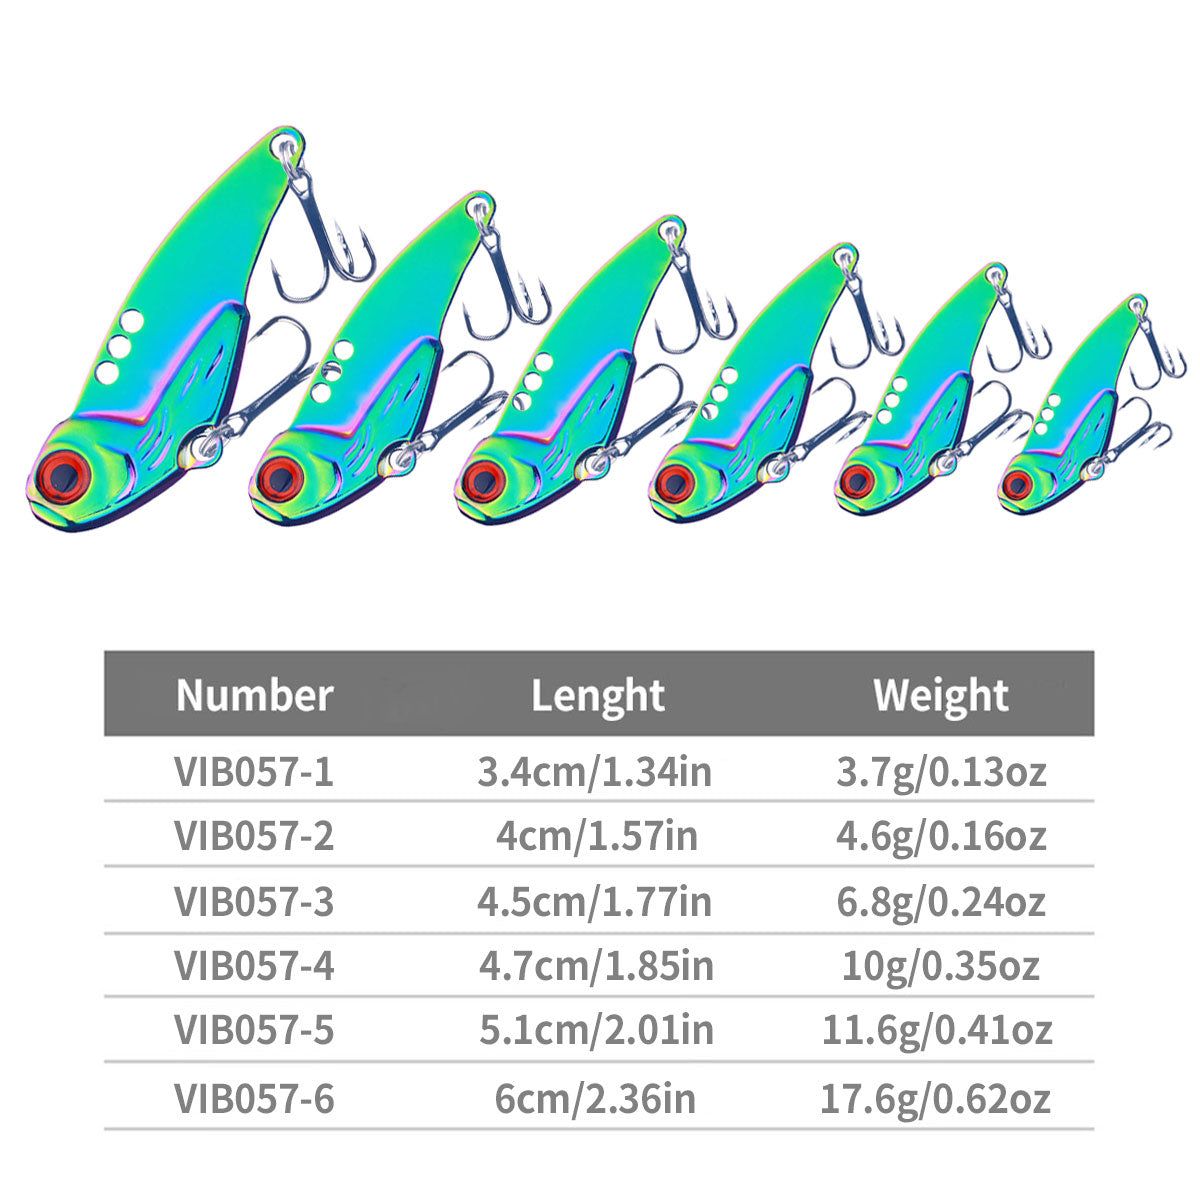  CWSDXM 5PCS Blade Baits with Head Jig,5g Metal VIB Hard Blade  Bait Fishing Spoon Lures for Freshwater Saltwater Bass Walleyes Trout  Crappie (11.5g-5pcs) : Sports & Outdoors